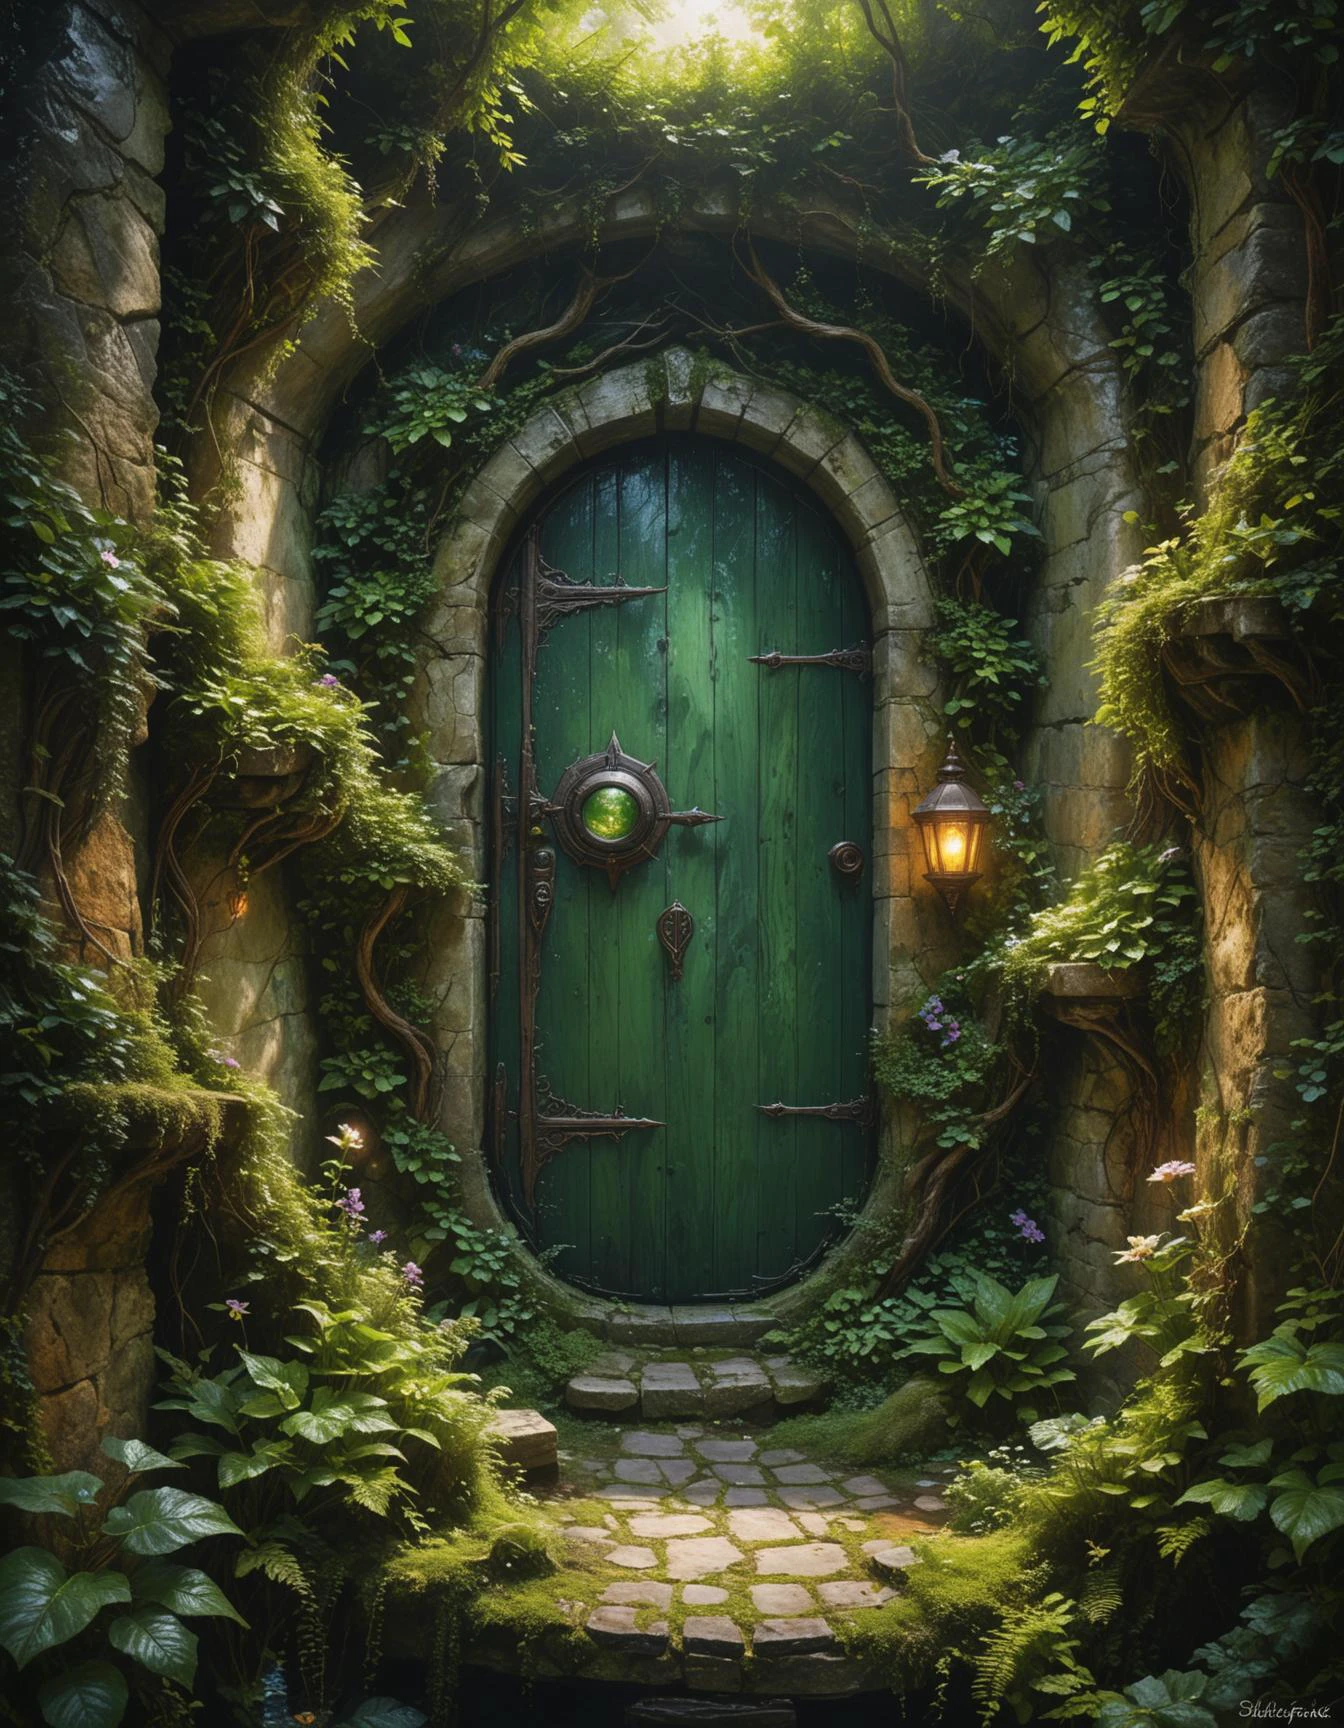 (Amidst the hidden corners of the world, Secret portals await discovery, gateways to other realms where magic and mystery hold sway over the laws of nature.:0.5) ([Elfpunk|Contemporary realism]:1.3) 